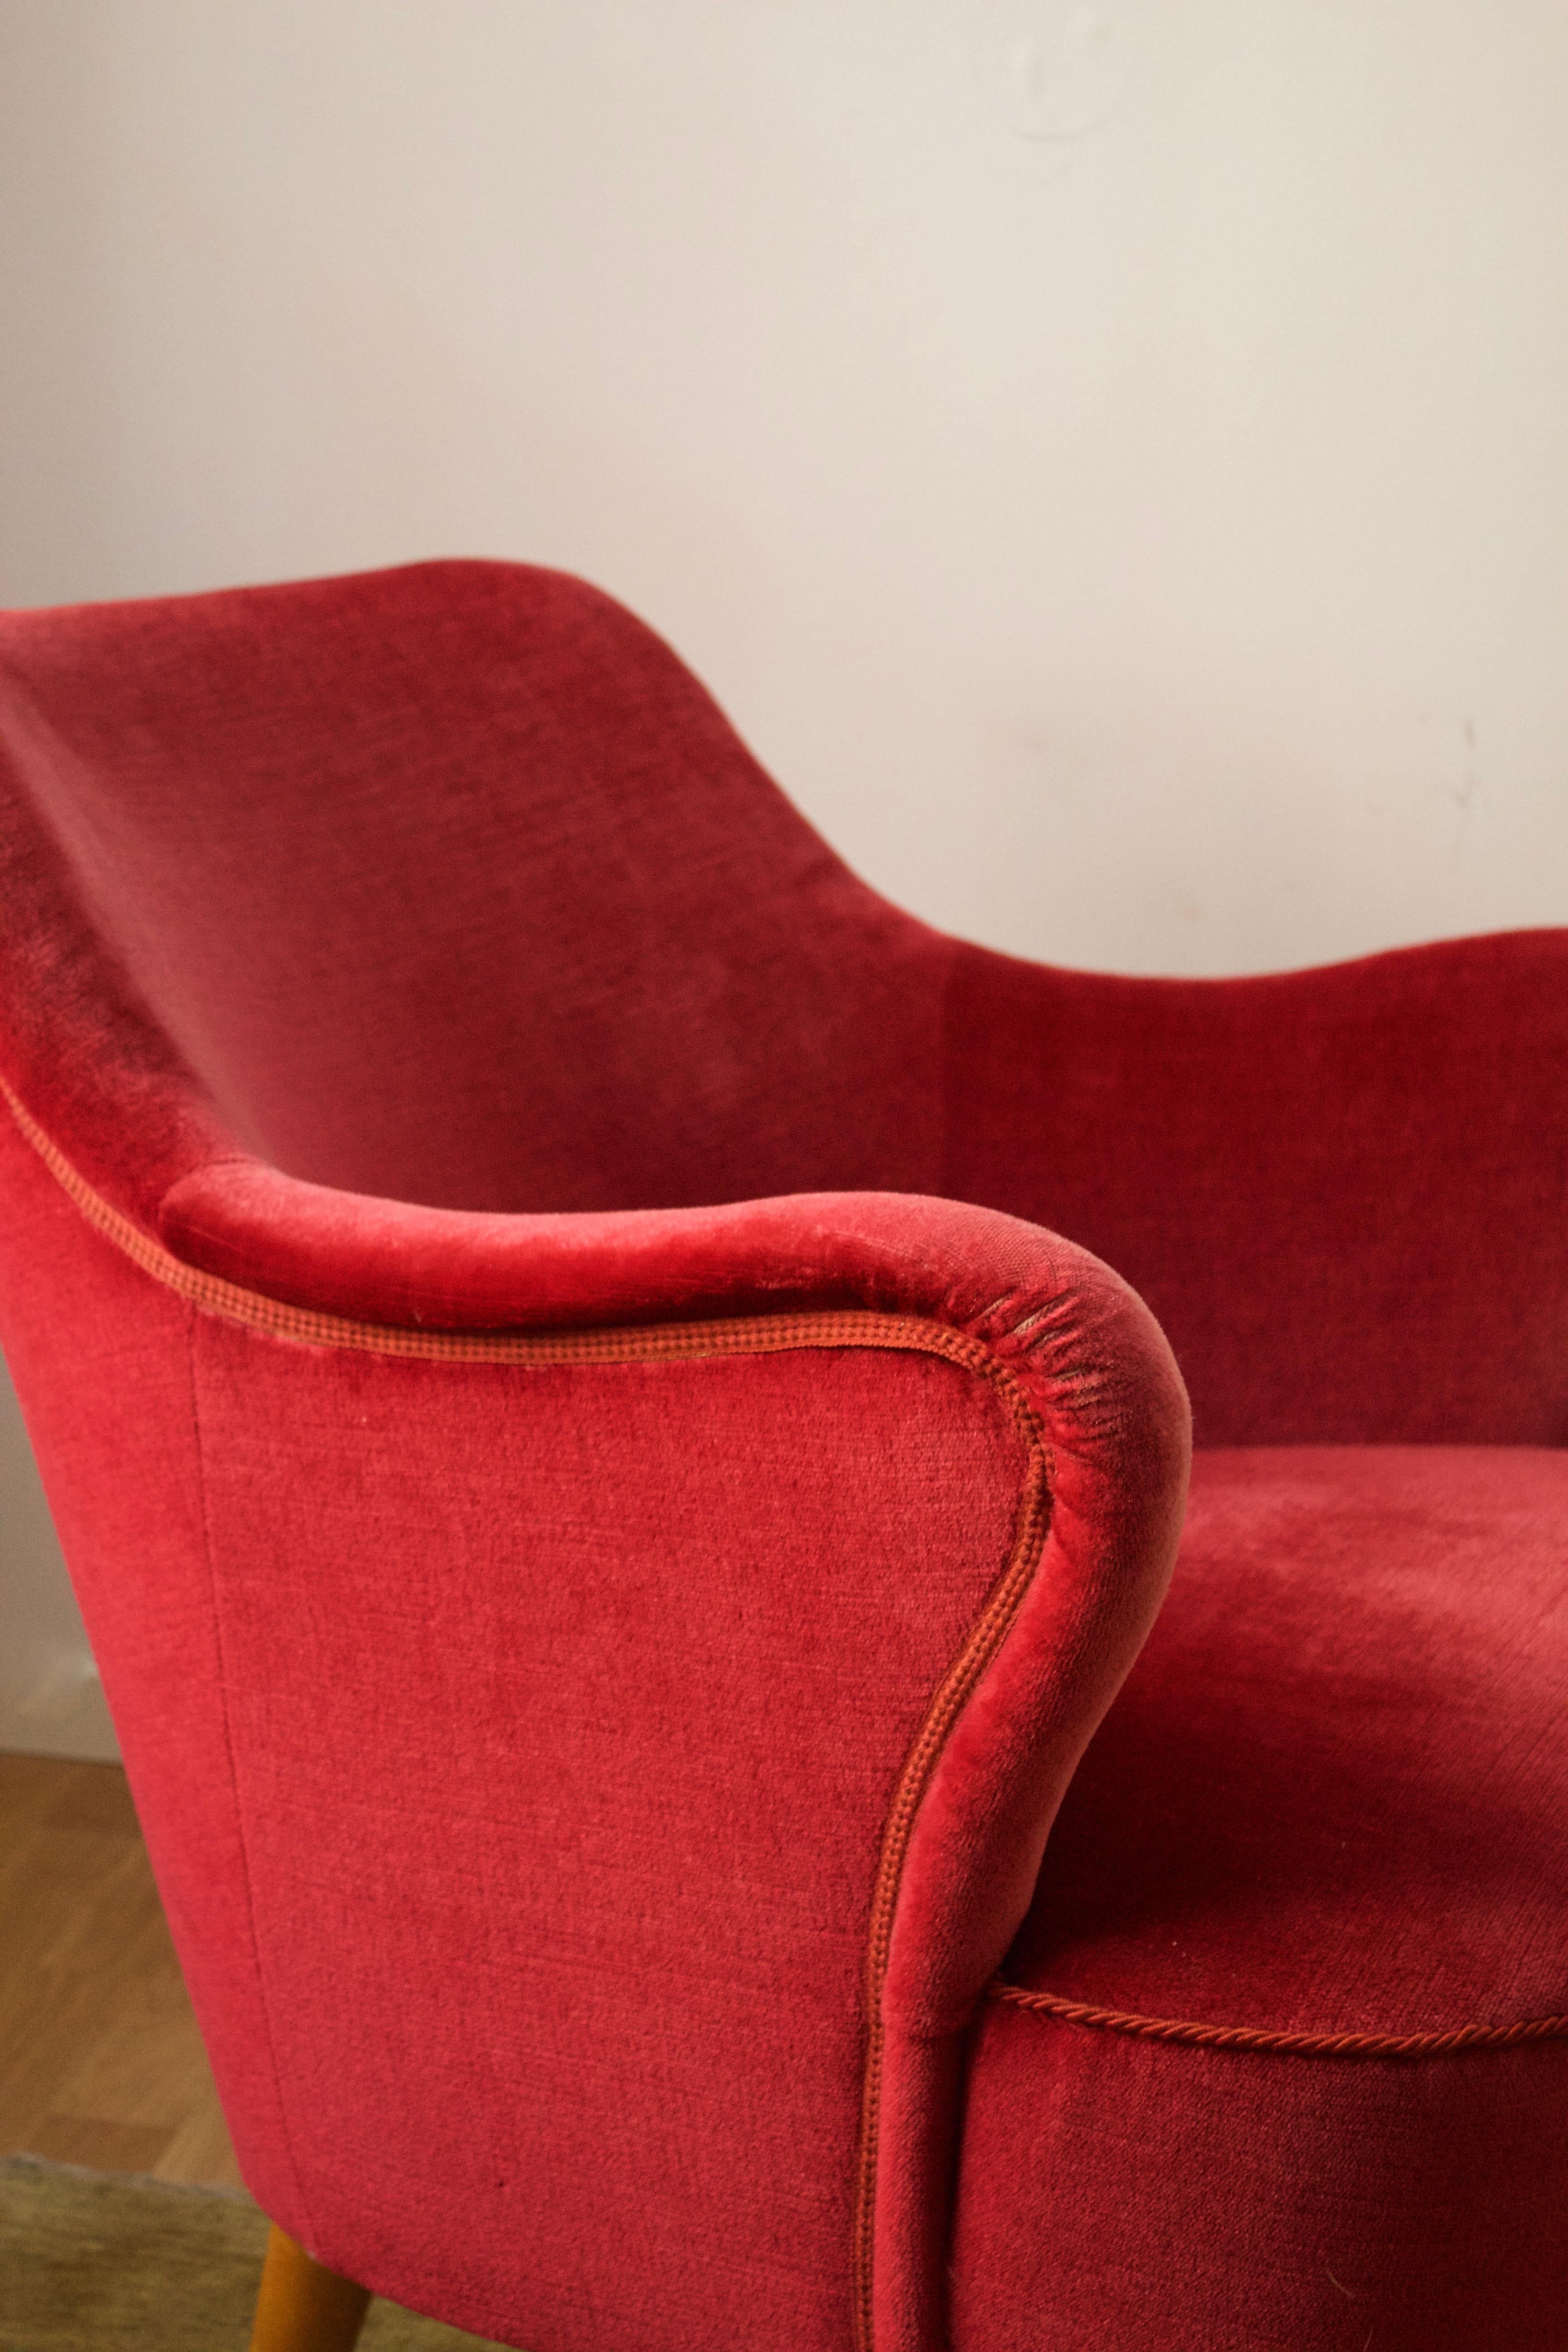 An organic lounge chair. Designed and produced in Sweden, 1940s. Features vintage velvet upholstery in fair condition.

Other designers of the period include Carl Malmsten, Kerstin Hörlin-Holmquist, Flemming Lassen, Gio Ponti, and Vladimir Kagan.